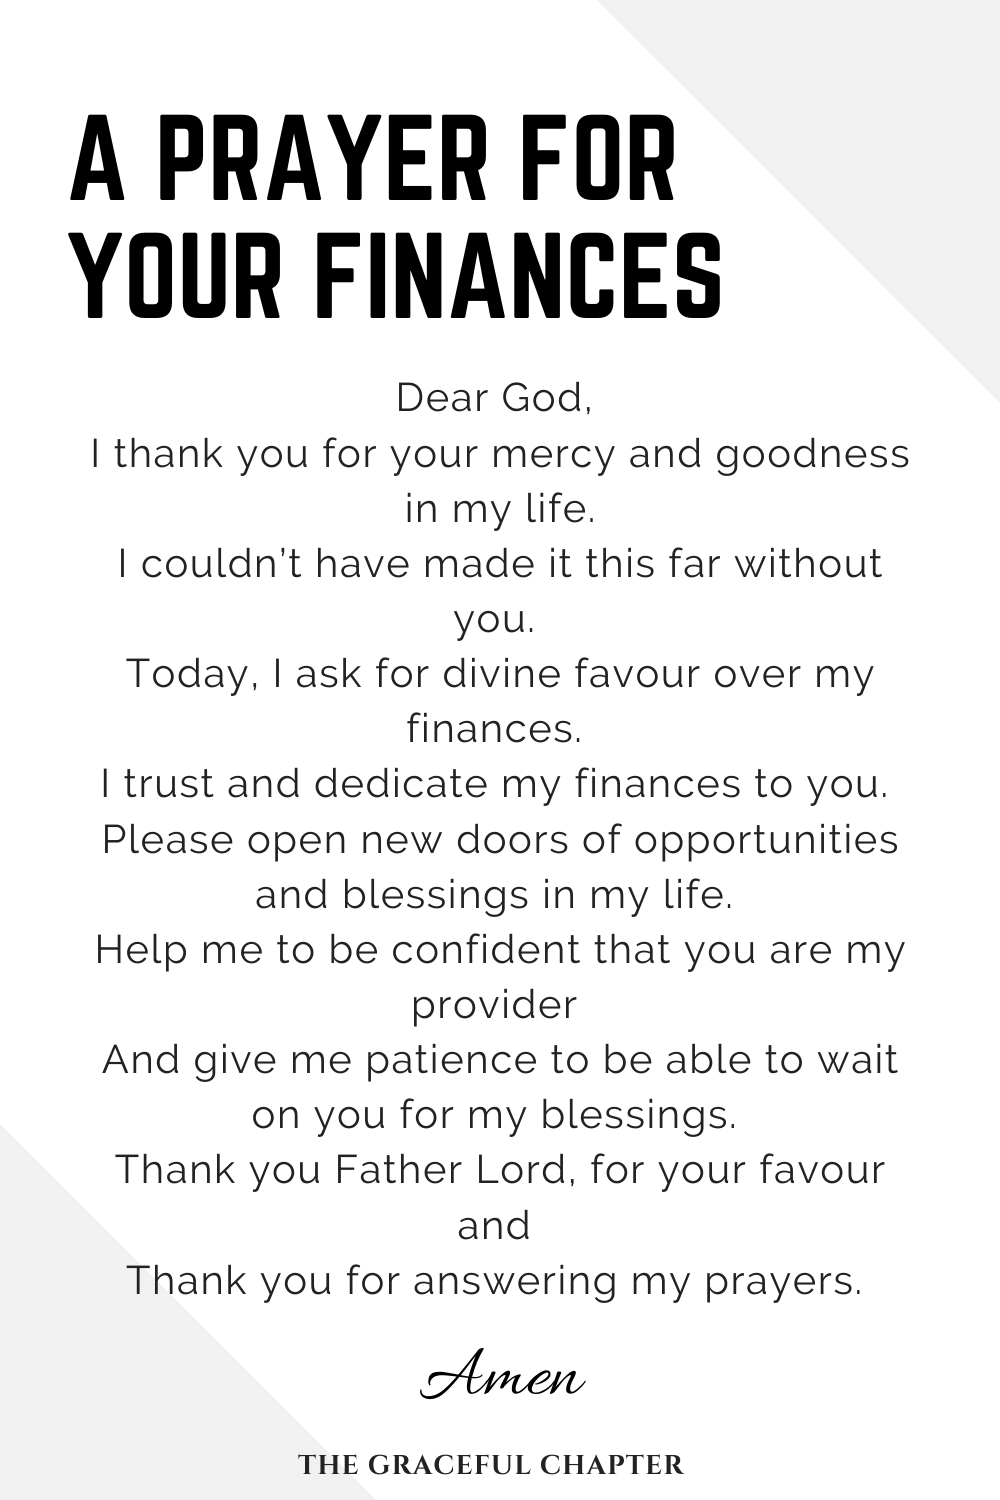 how to pray for your finances